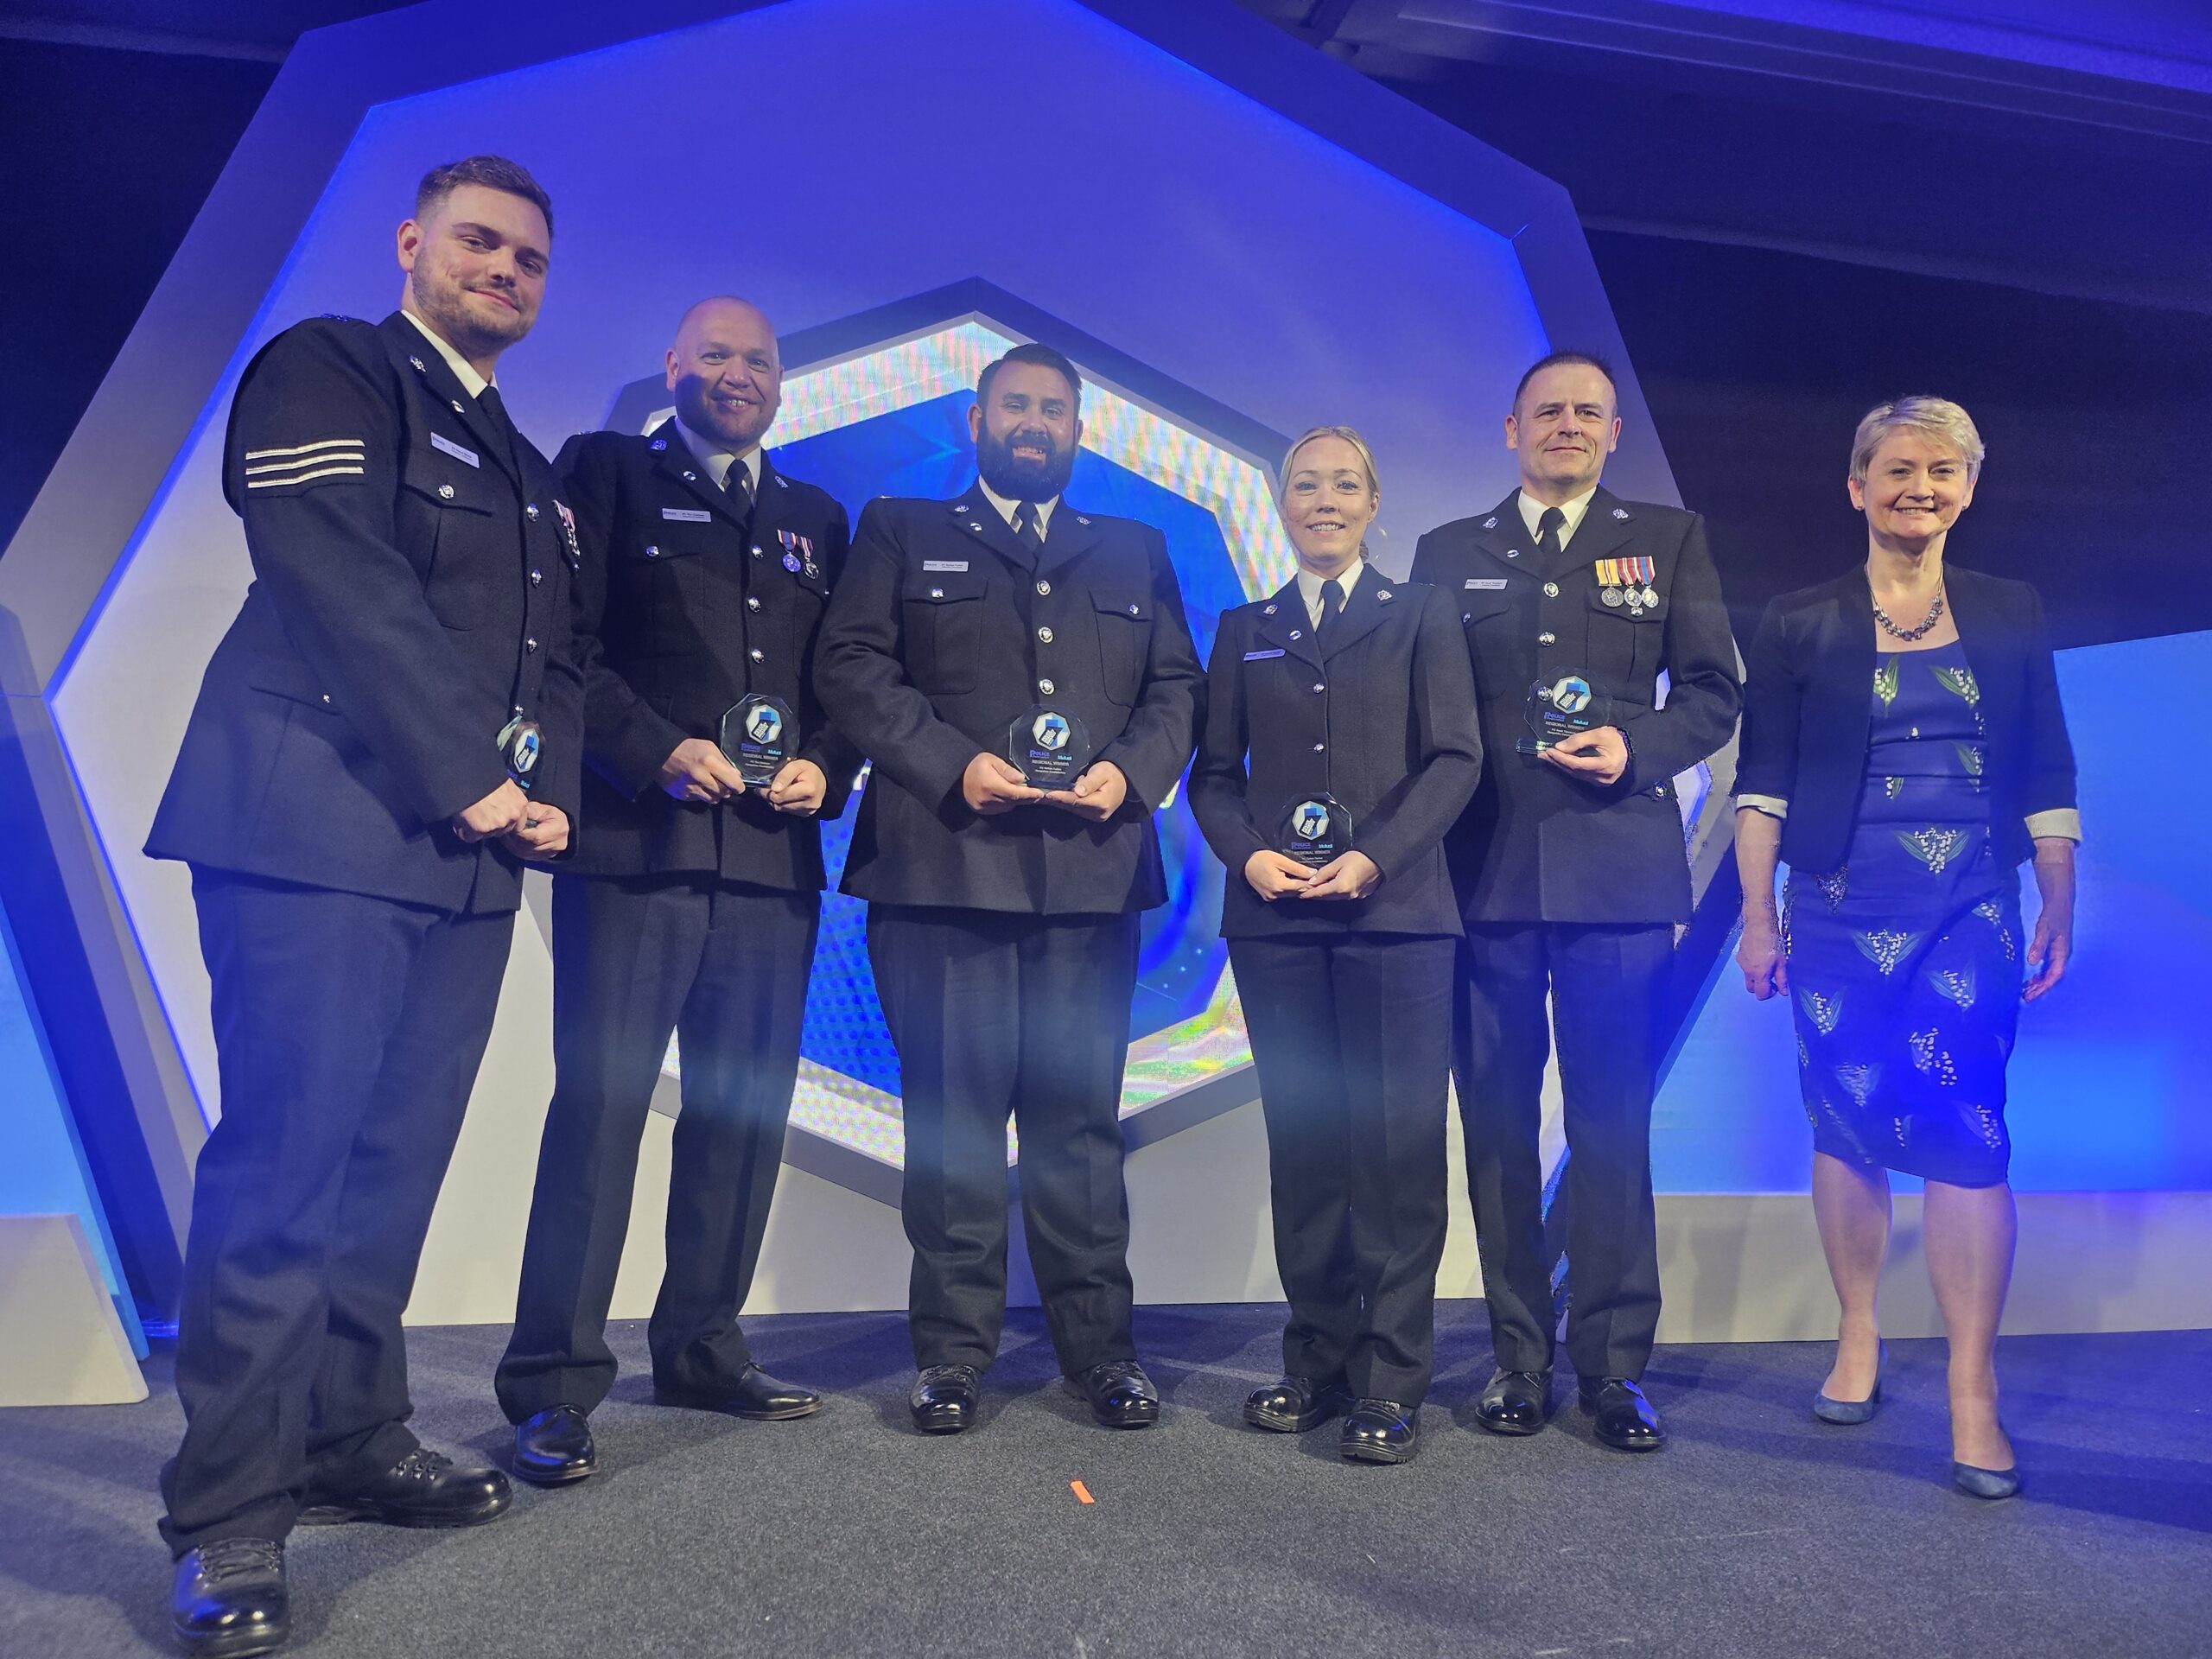 Hampshire Officers Win South East Region Bravery Award